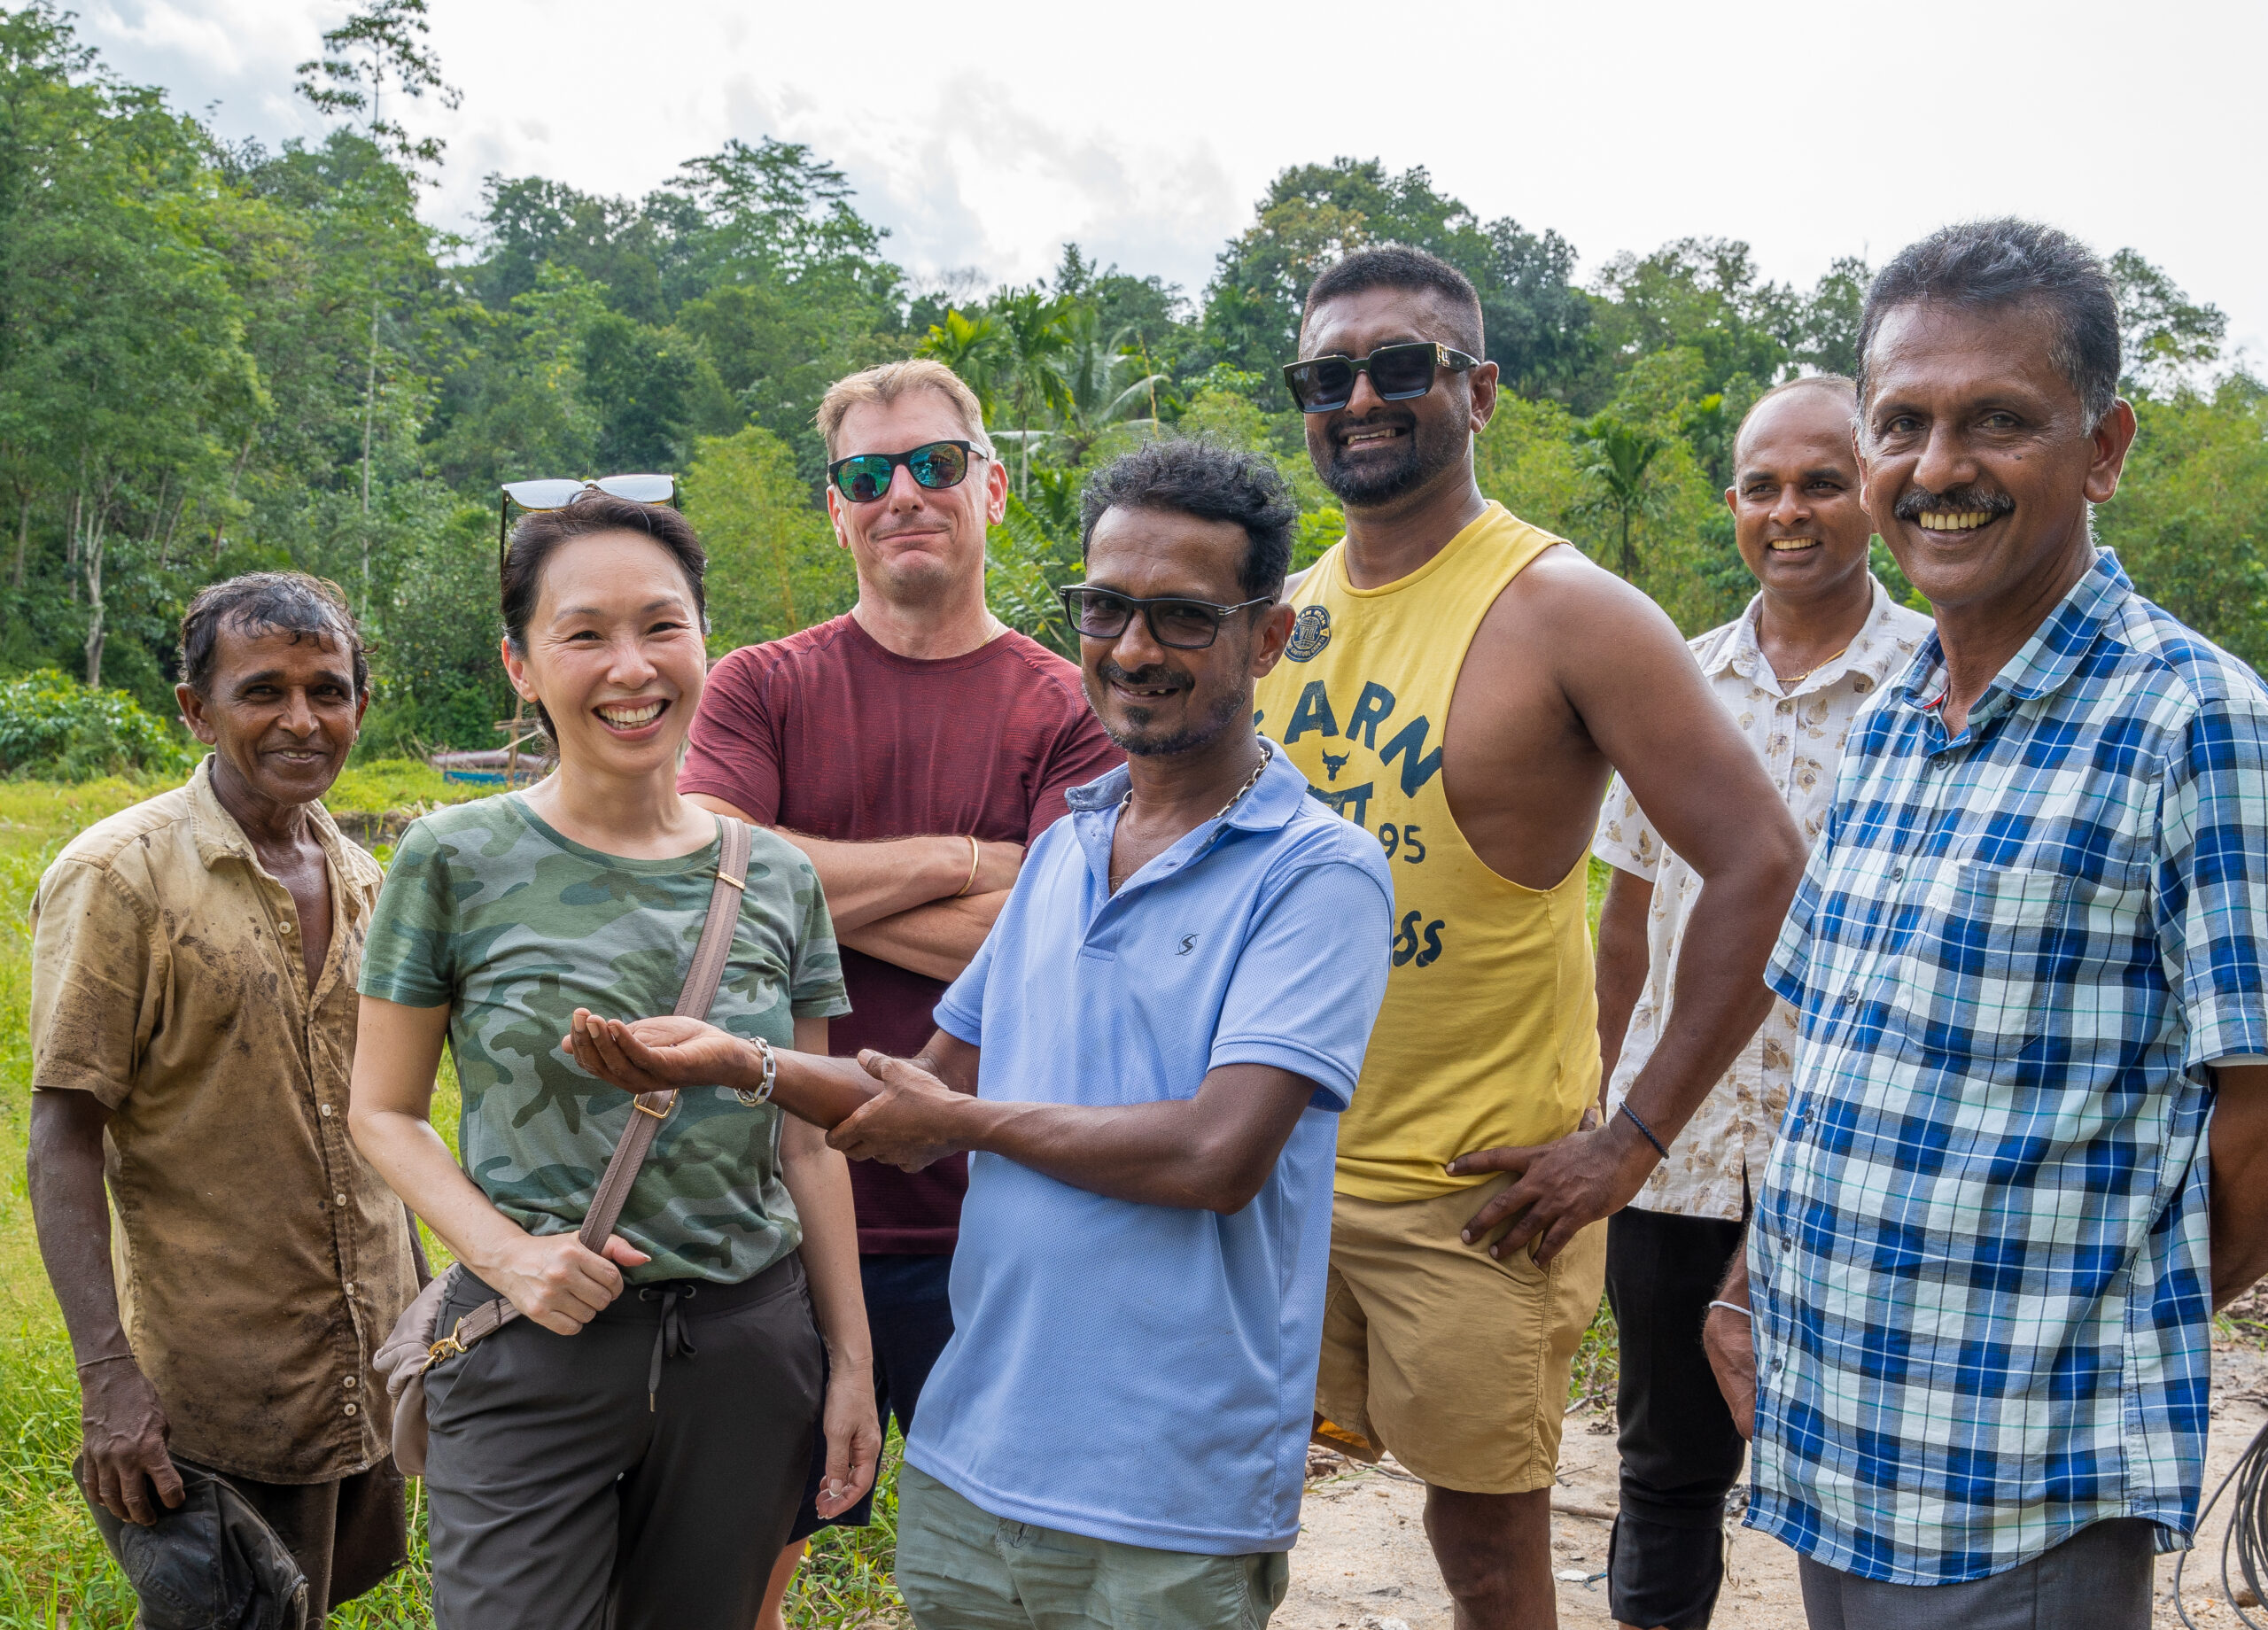 A diverse group of individuals, including a Chinese woman and a Caucasian, standing among joyful Sri Lankan men at a Sri Lanka mining site, all sharing smiles